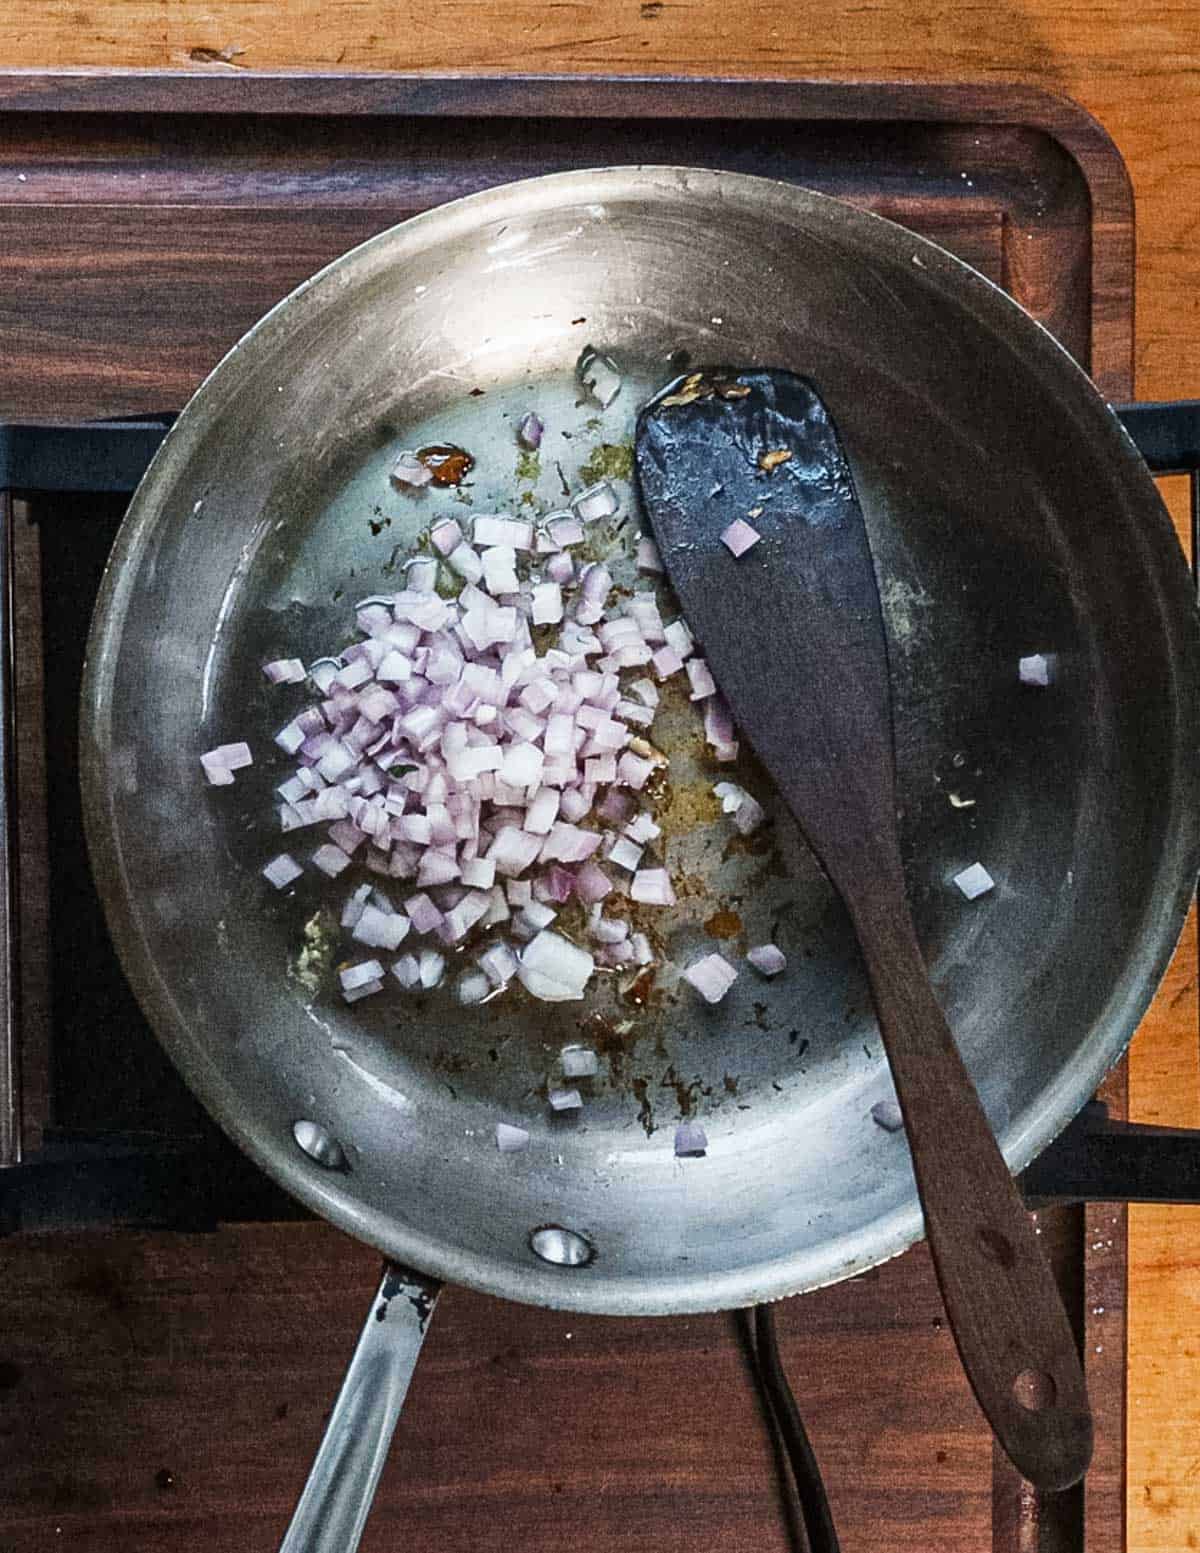 Cooking shallot and garlic in a saute pan. 